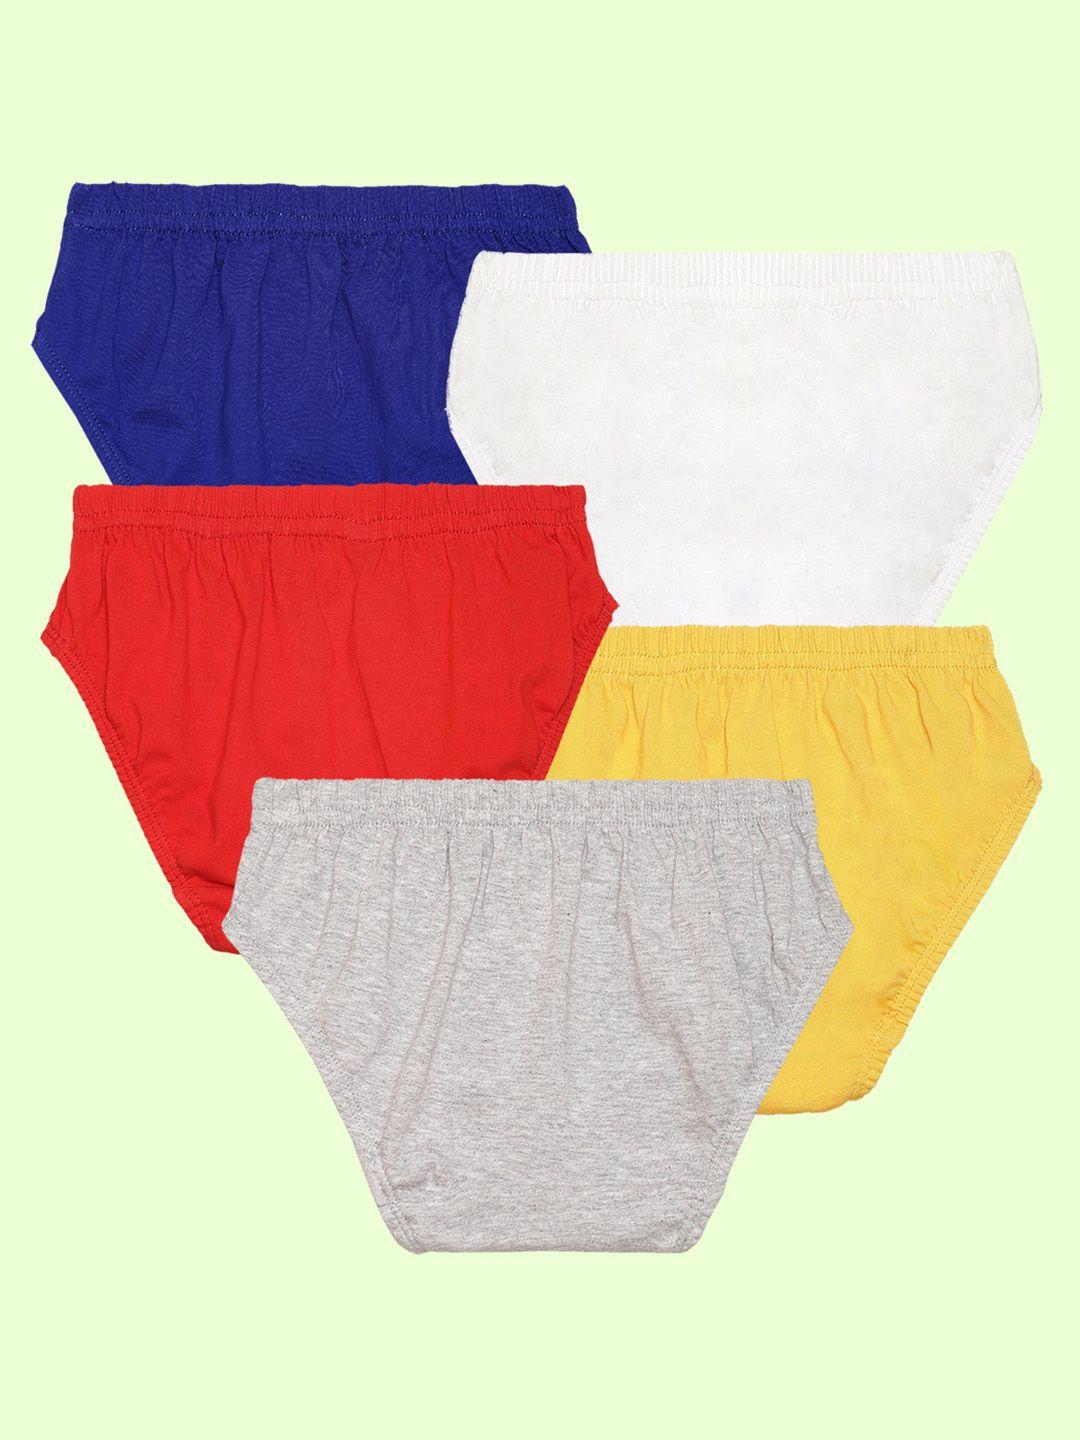 nusyl boys pack of 5 pure cotton basic briefs